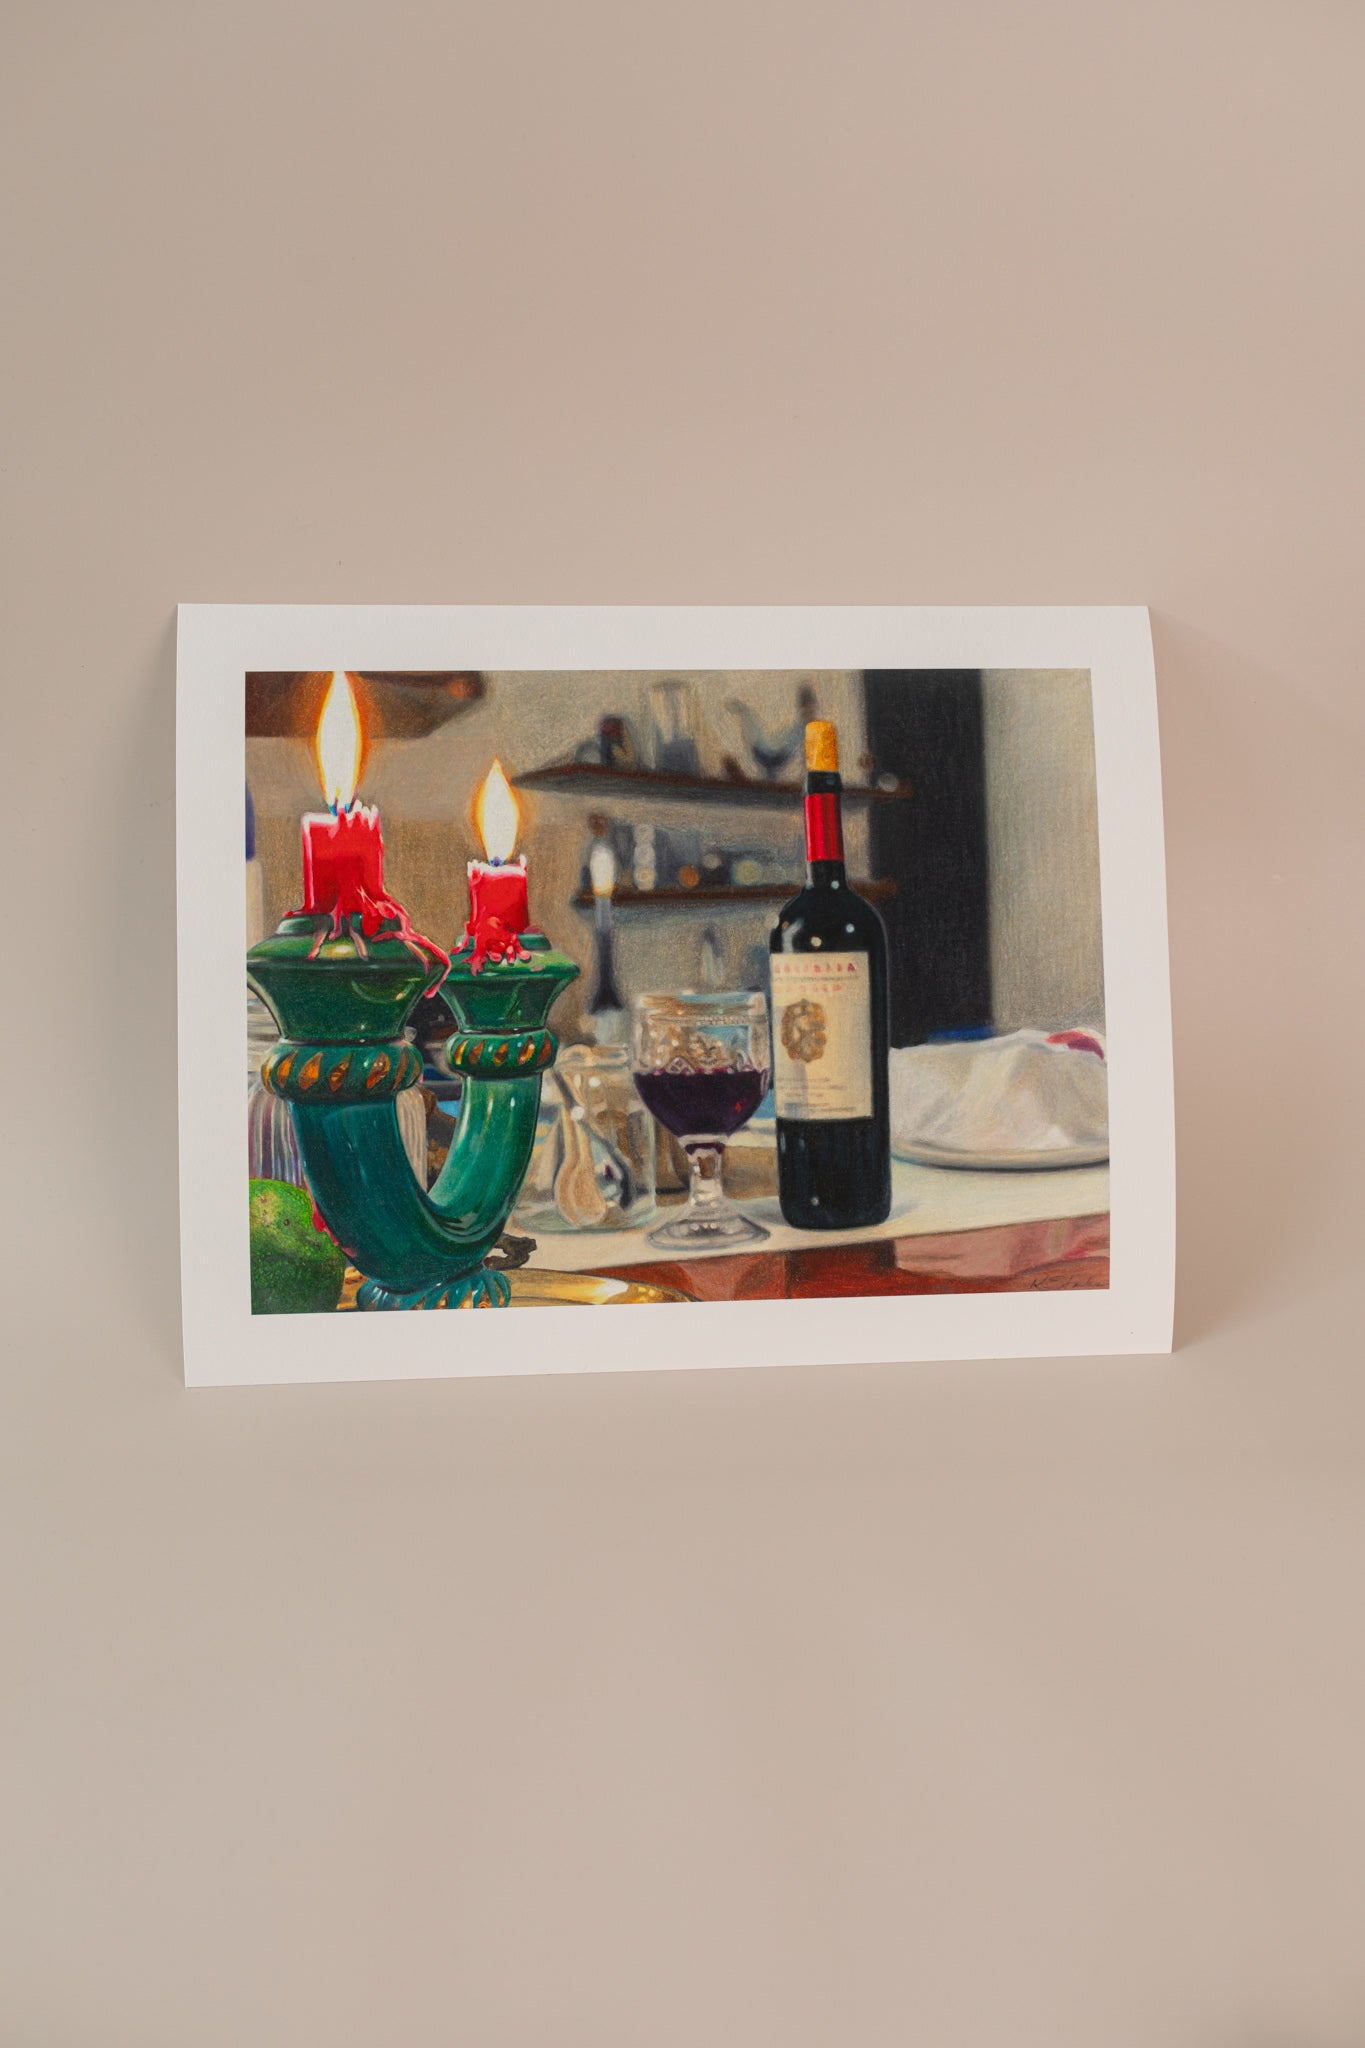 Photo of an art print for an italian series of a bottle of wine with a candle holder in the foreground. Print is on a light pink background